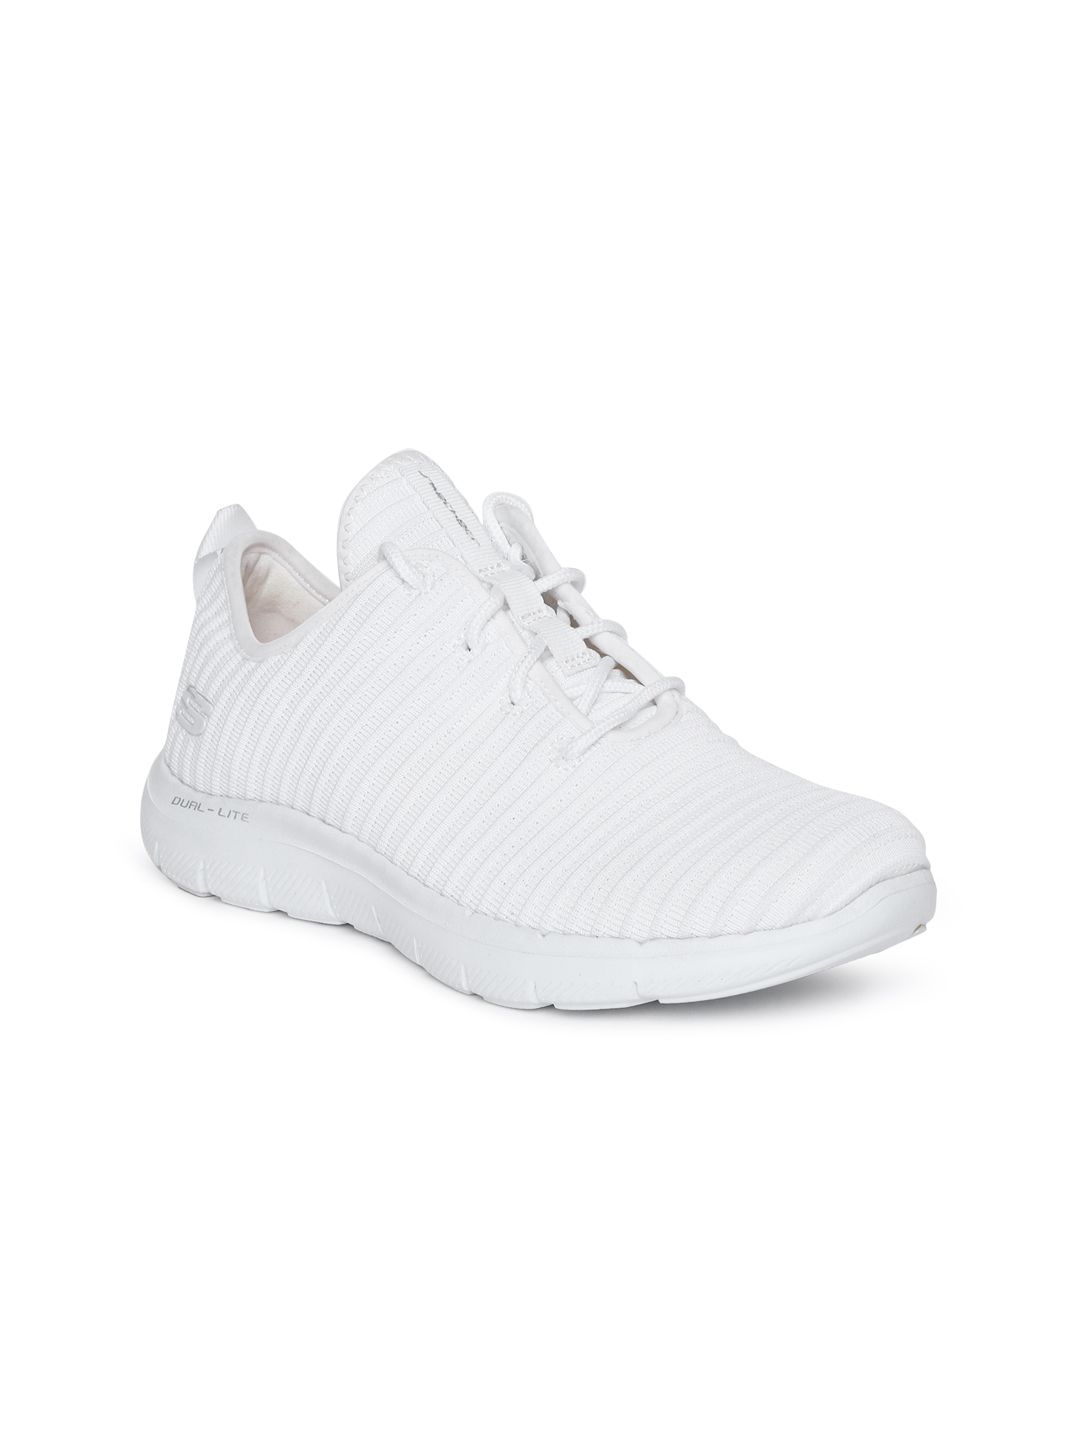 skechers all white shoes